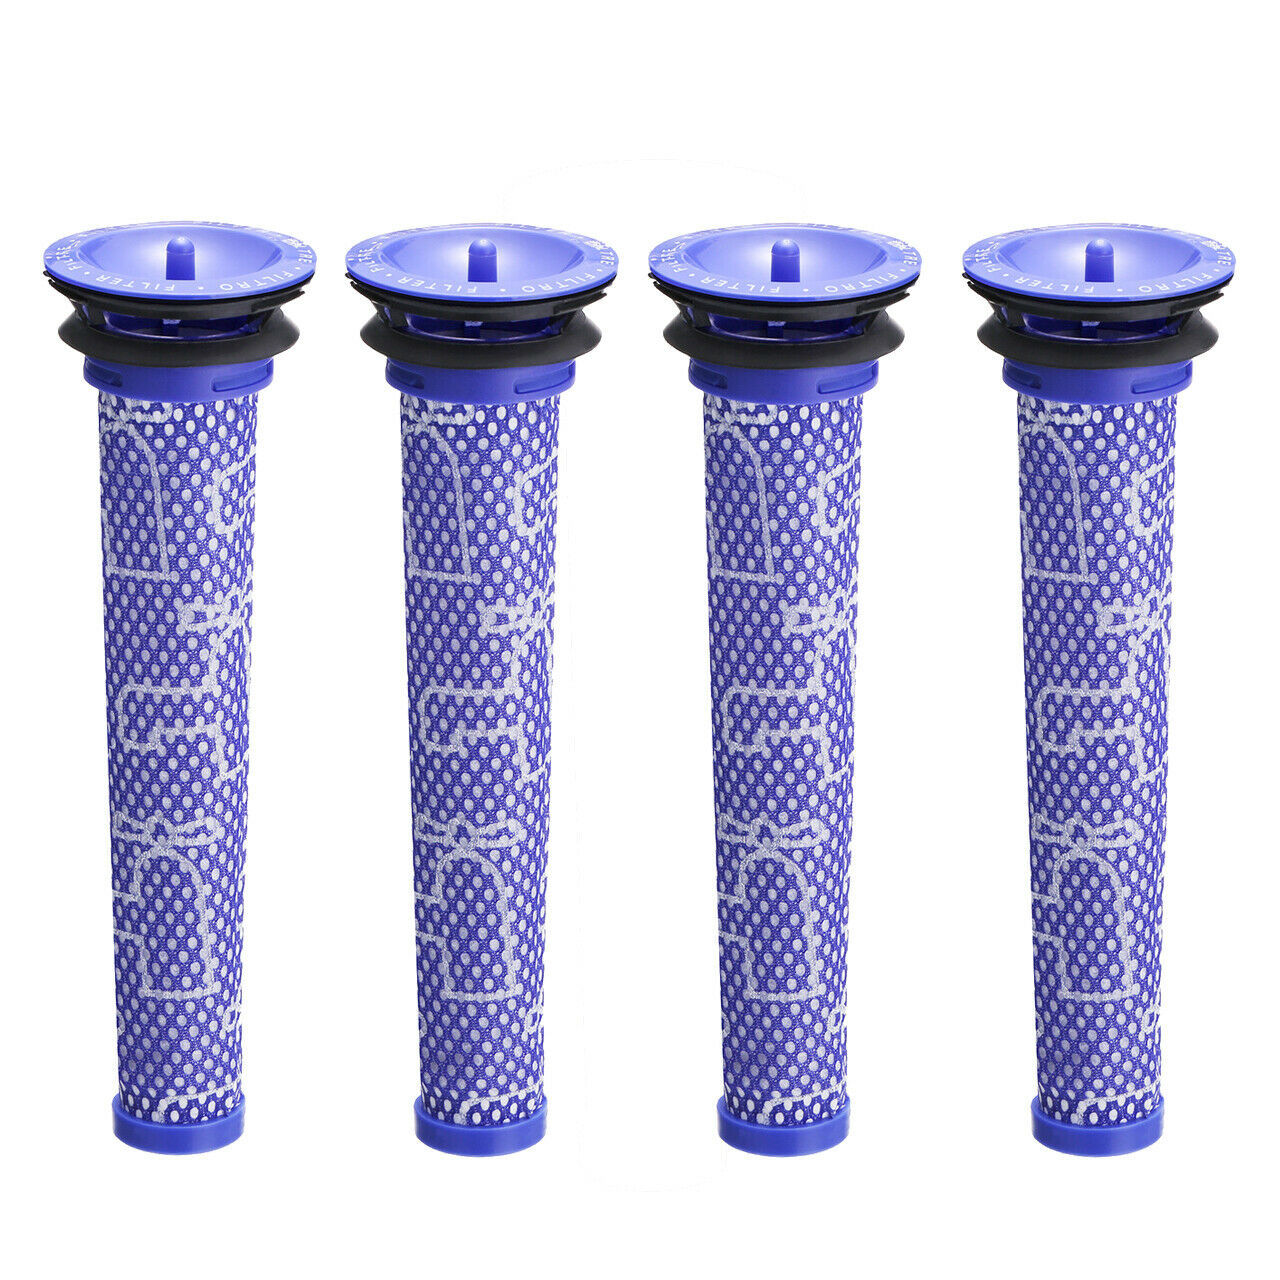 4 Pack Replacement Vacuum Filters For Dyson V6 V7 V8 Motorhead Absolute Hepa